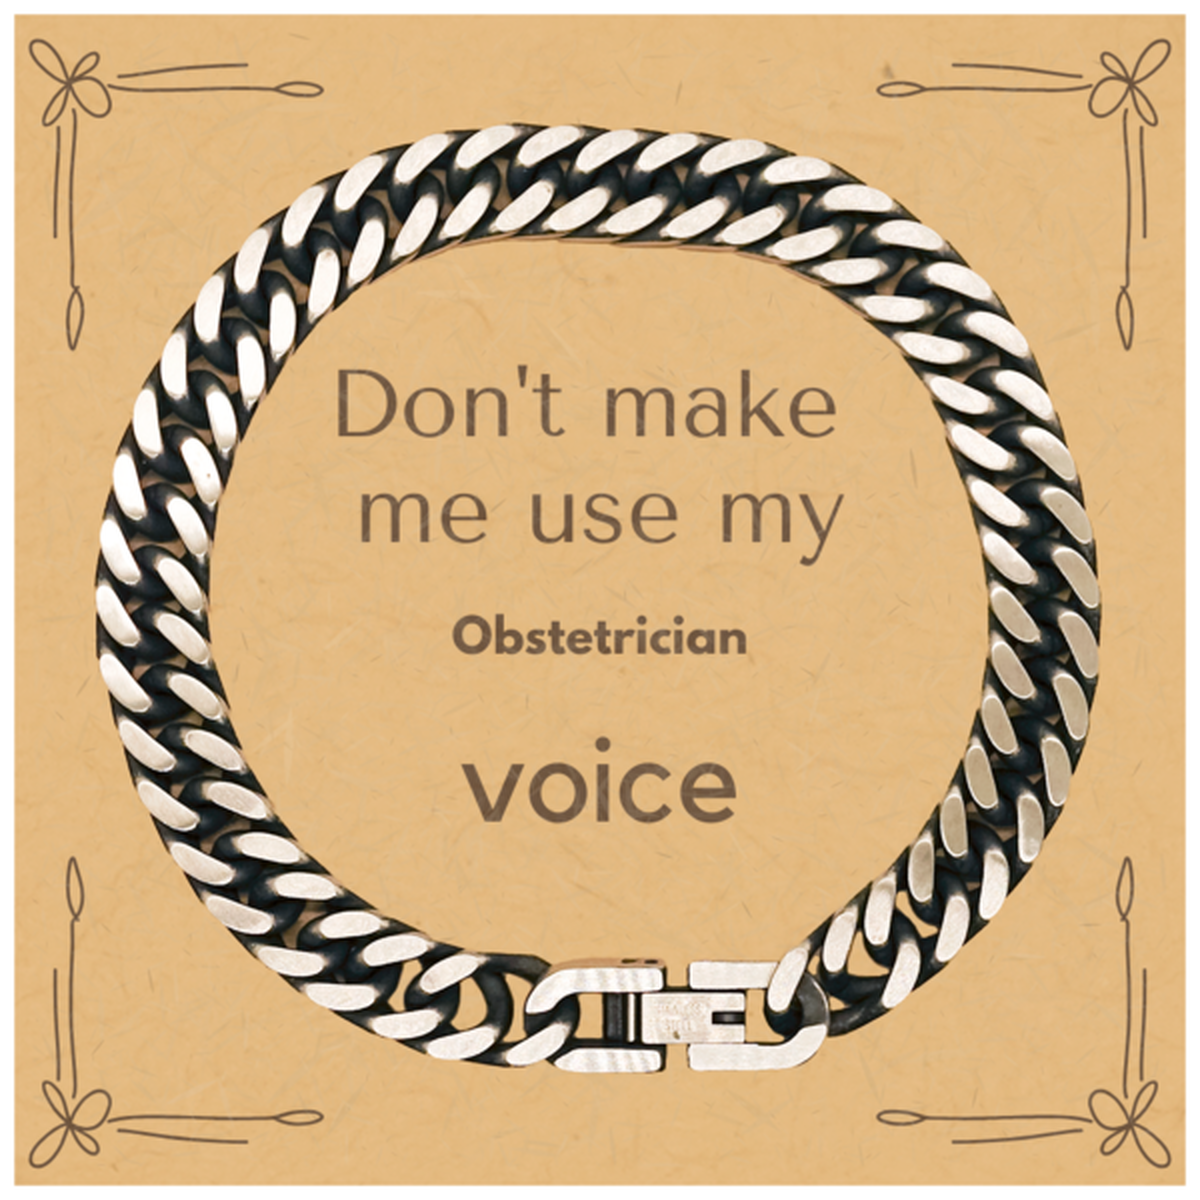 Don't make me use my Obstetrician voice, Sarcasm Obstetrician Card Gifts, Christmas Obstetrician Cuban Link Chain Bracelet Birthday Unique Gifts For Obstetrician Coworkers, Men, Women, Colleague, Friends